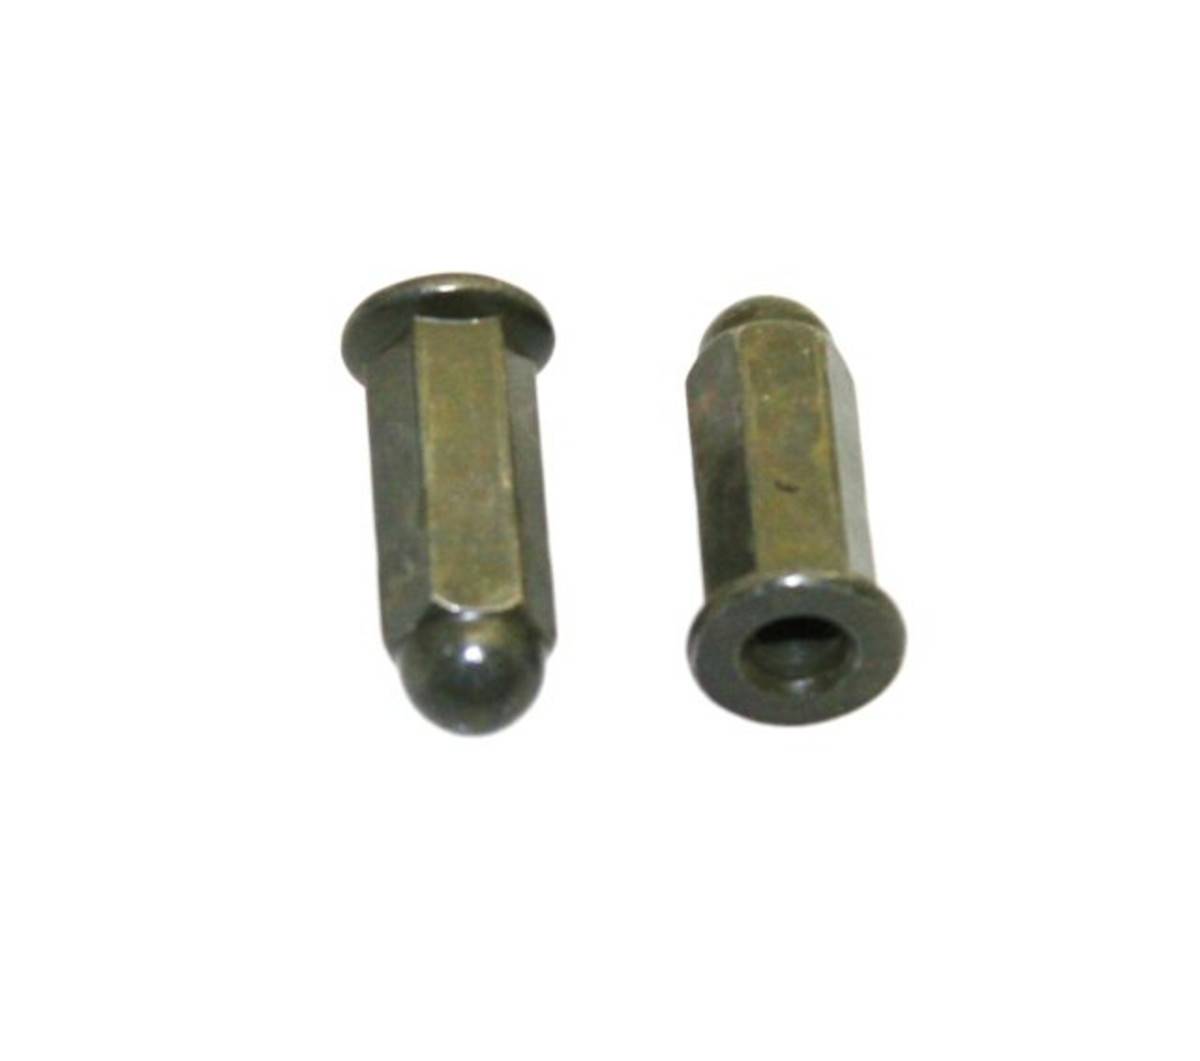 GY6 And QMB Exhaust Cap Nuts